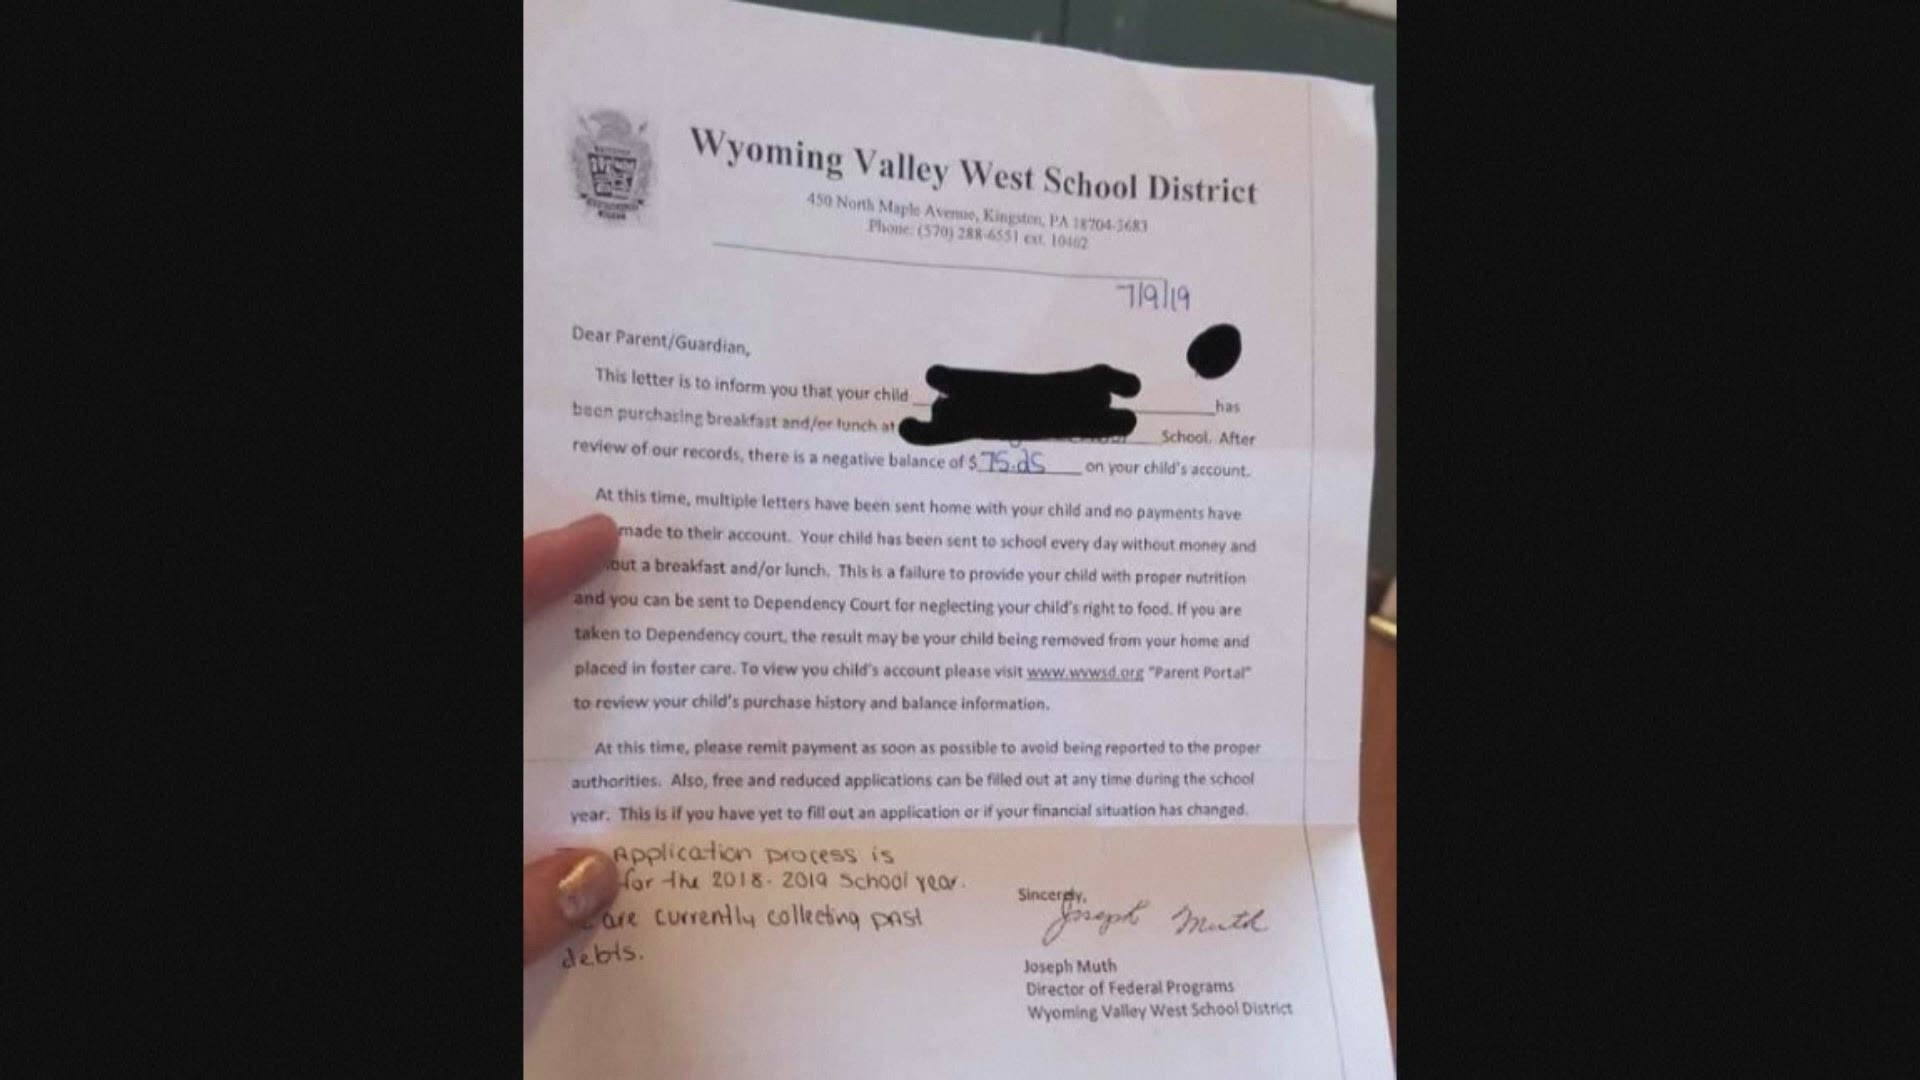 A Pennsylvania school district has backed away from threats to take parents to court, and possibly take their children away over school lunch debt. The school leader who signed a letter which initially made the threat now says the message was "overzealously stated."